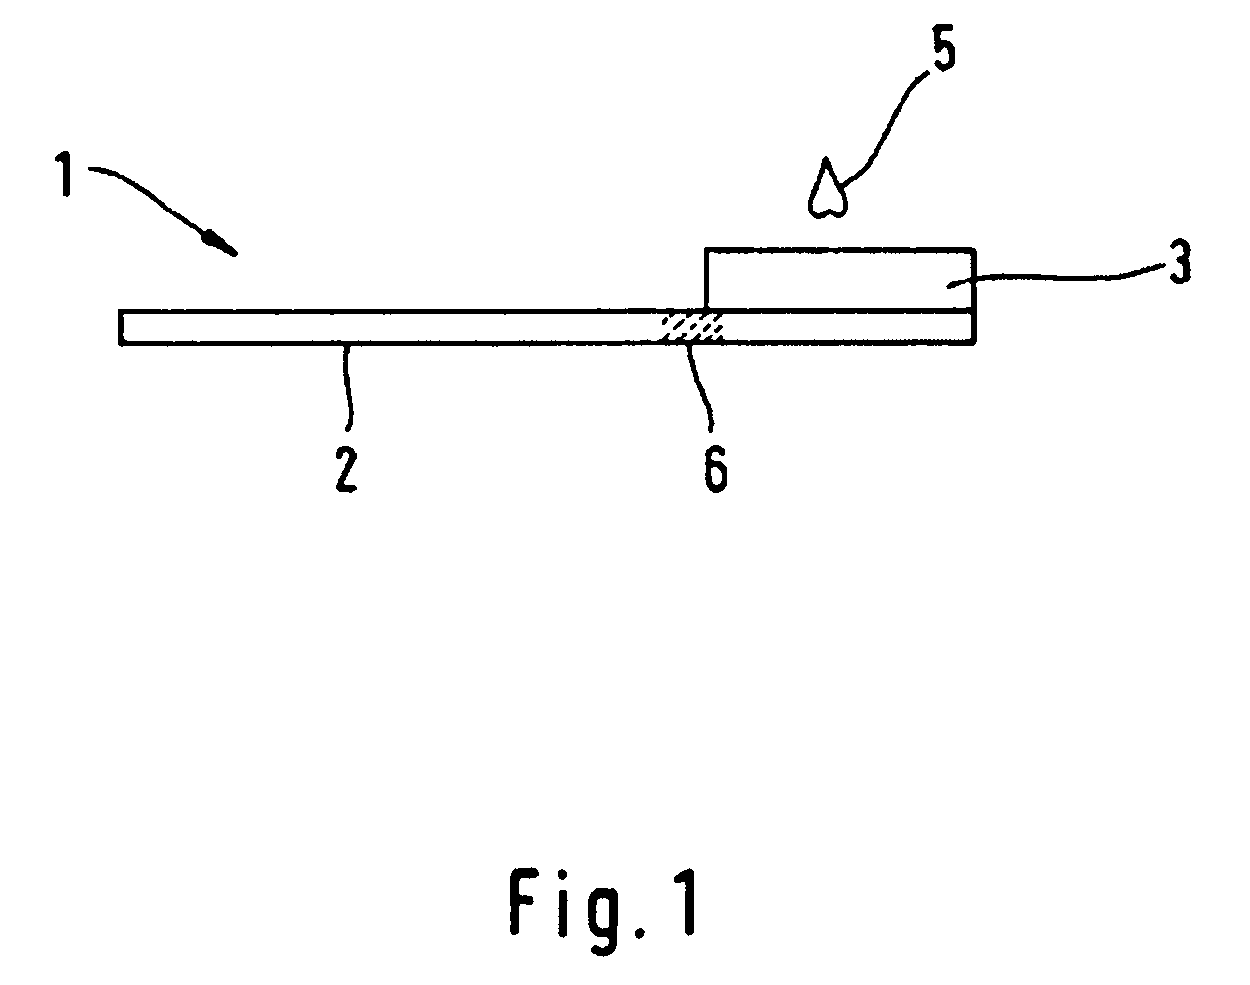 Device and Method for Separating and Discharging Plasma